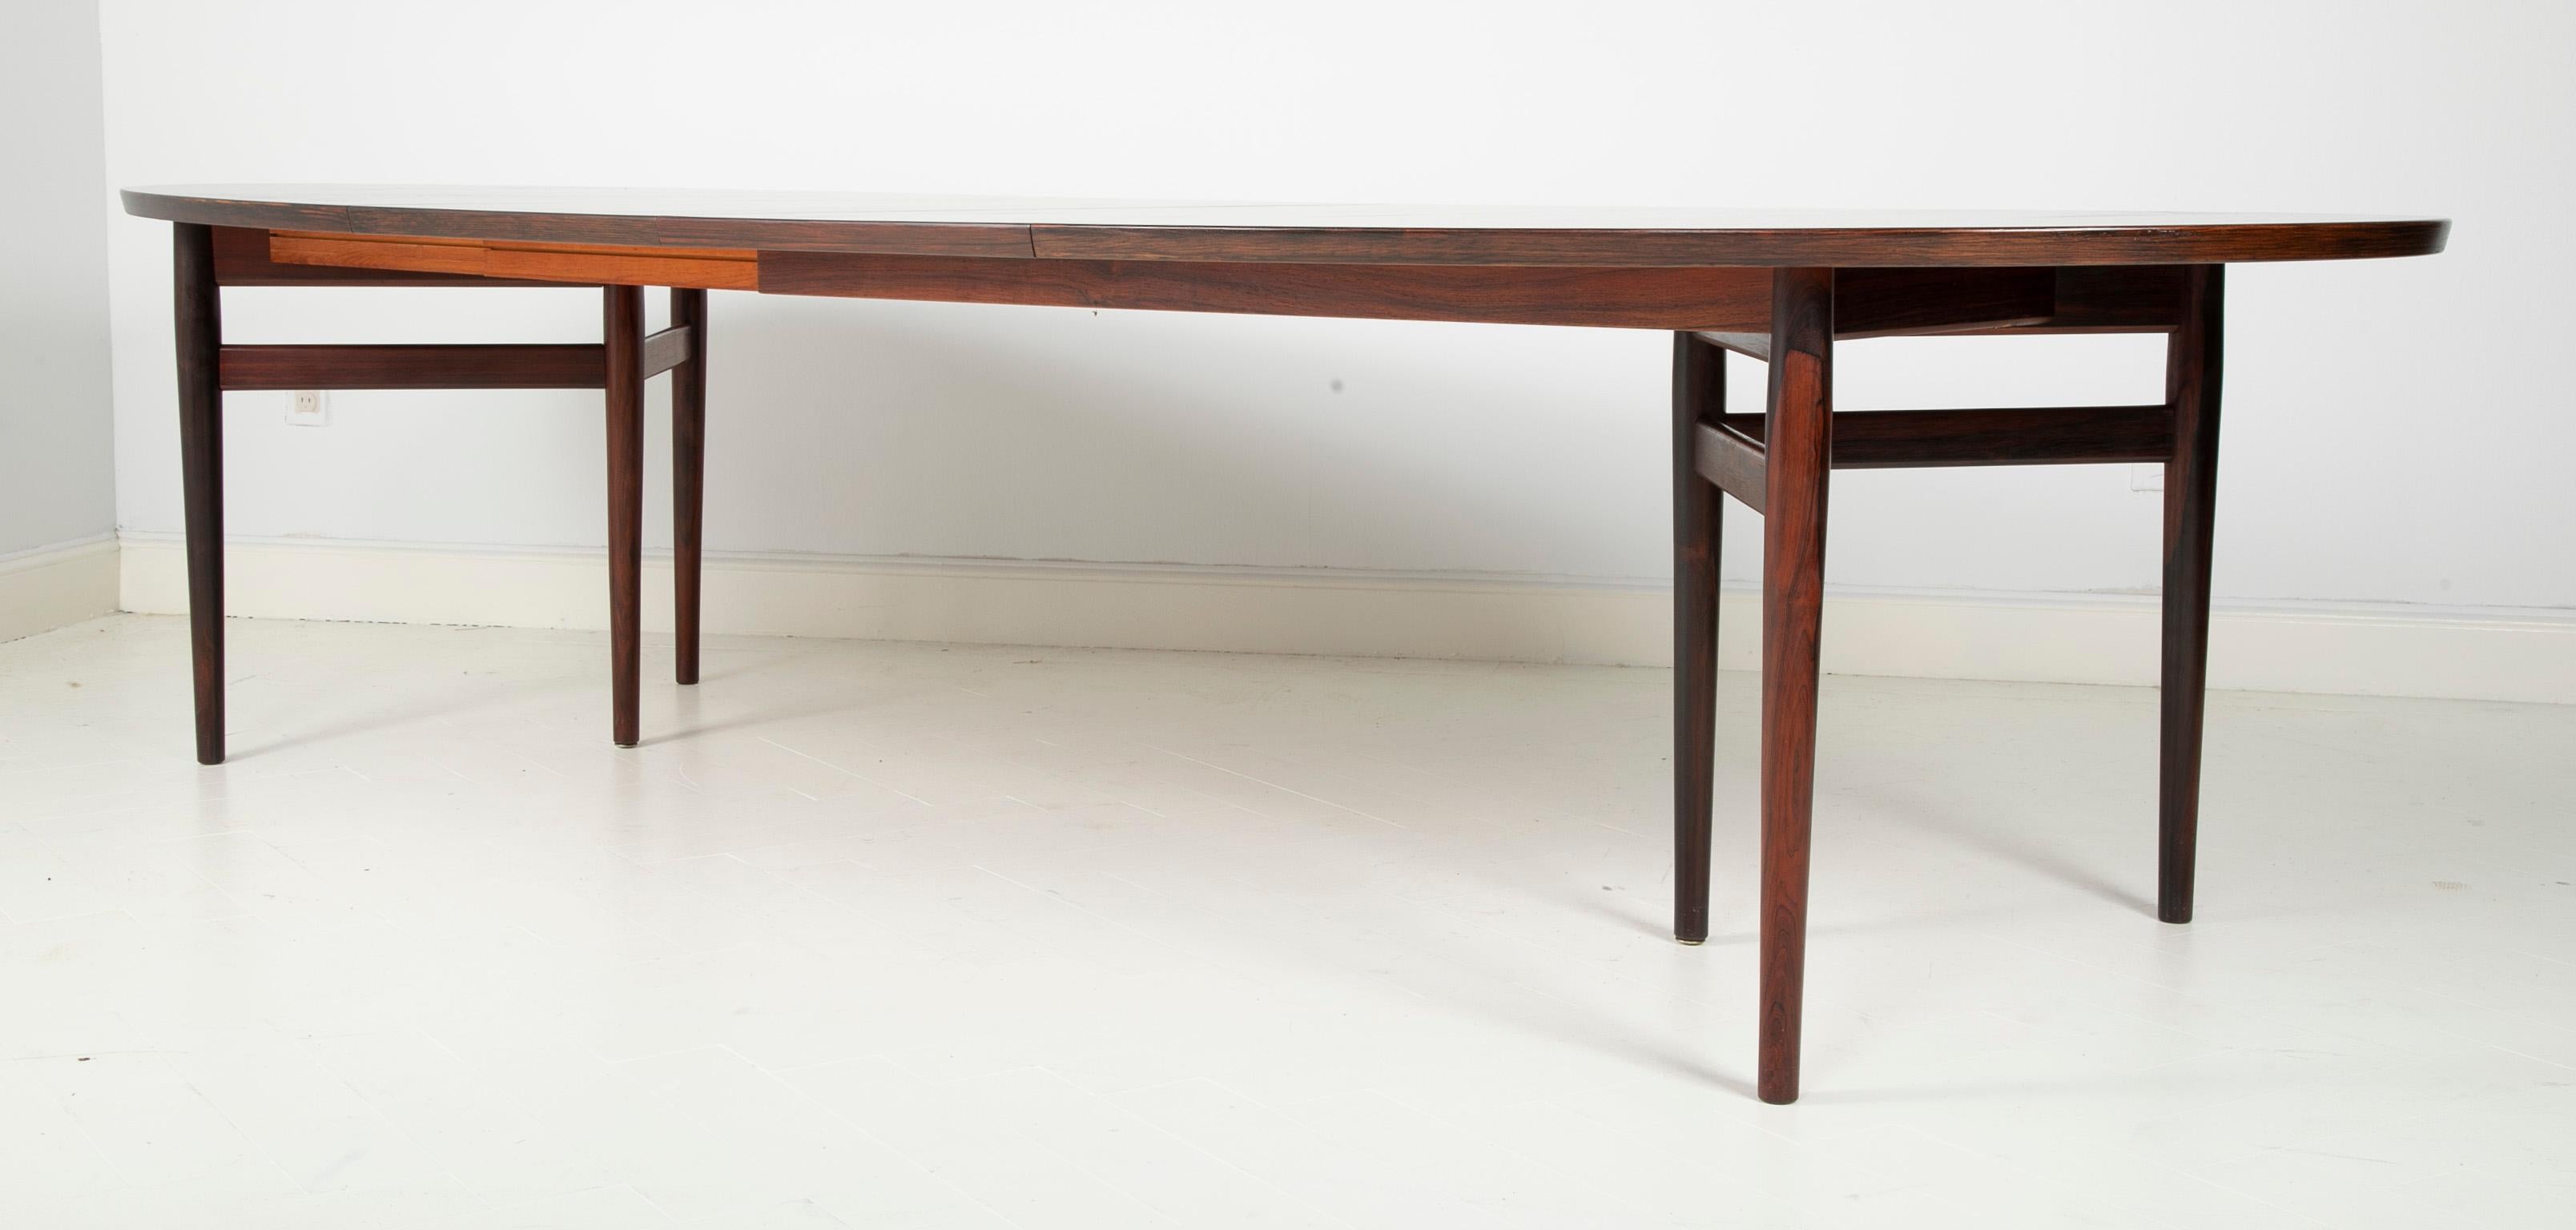 A Arne Vodder designed rosewood oval dining table with two additional leaves. Produced by Sibast Furniture in Denmark, circa 1965.

Measures: Total without leaves 78 inches
Total with leaves 118.5 inches
There are 2 x 19.5 inch leaves.